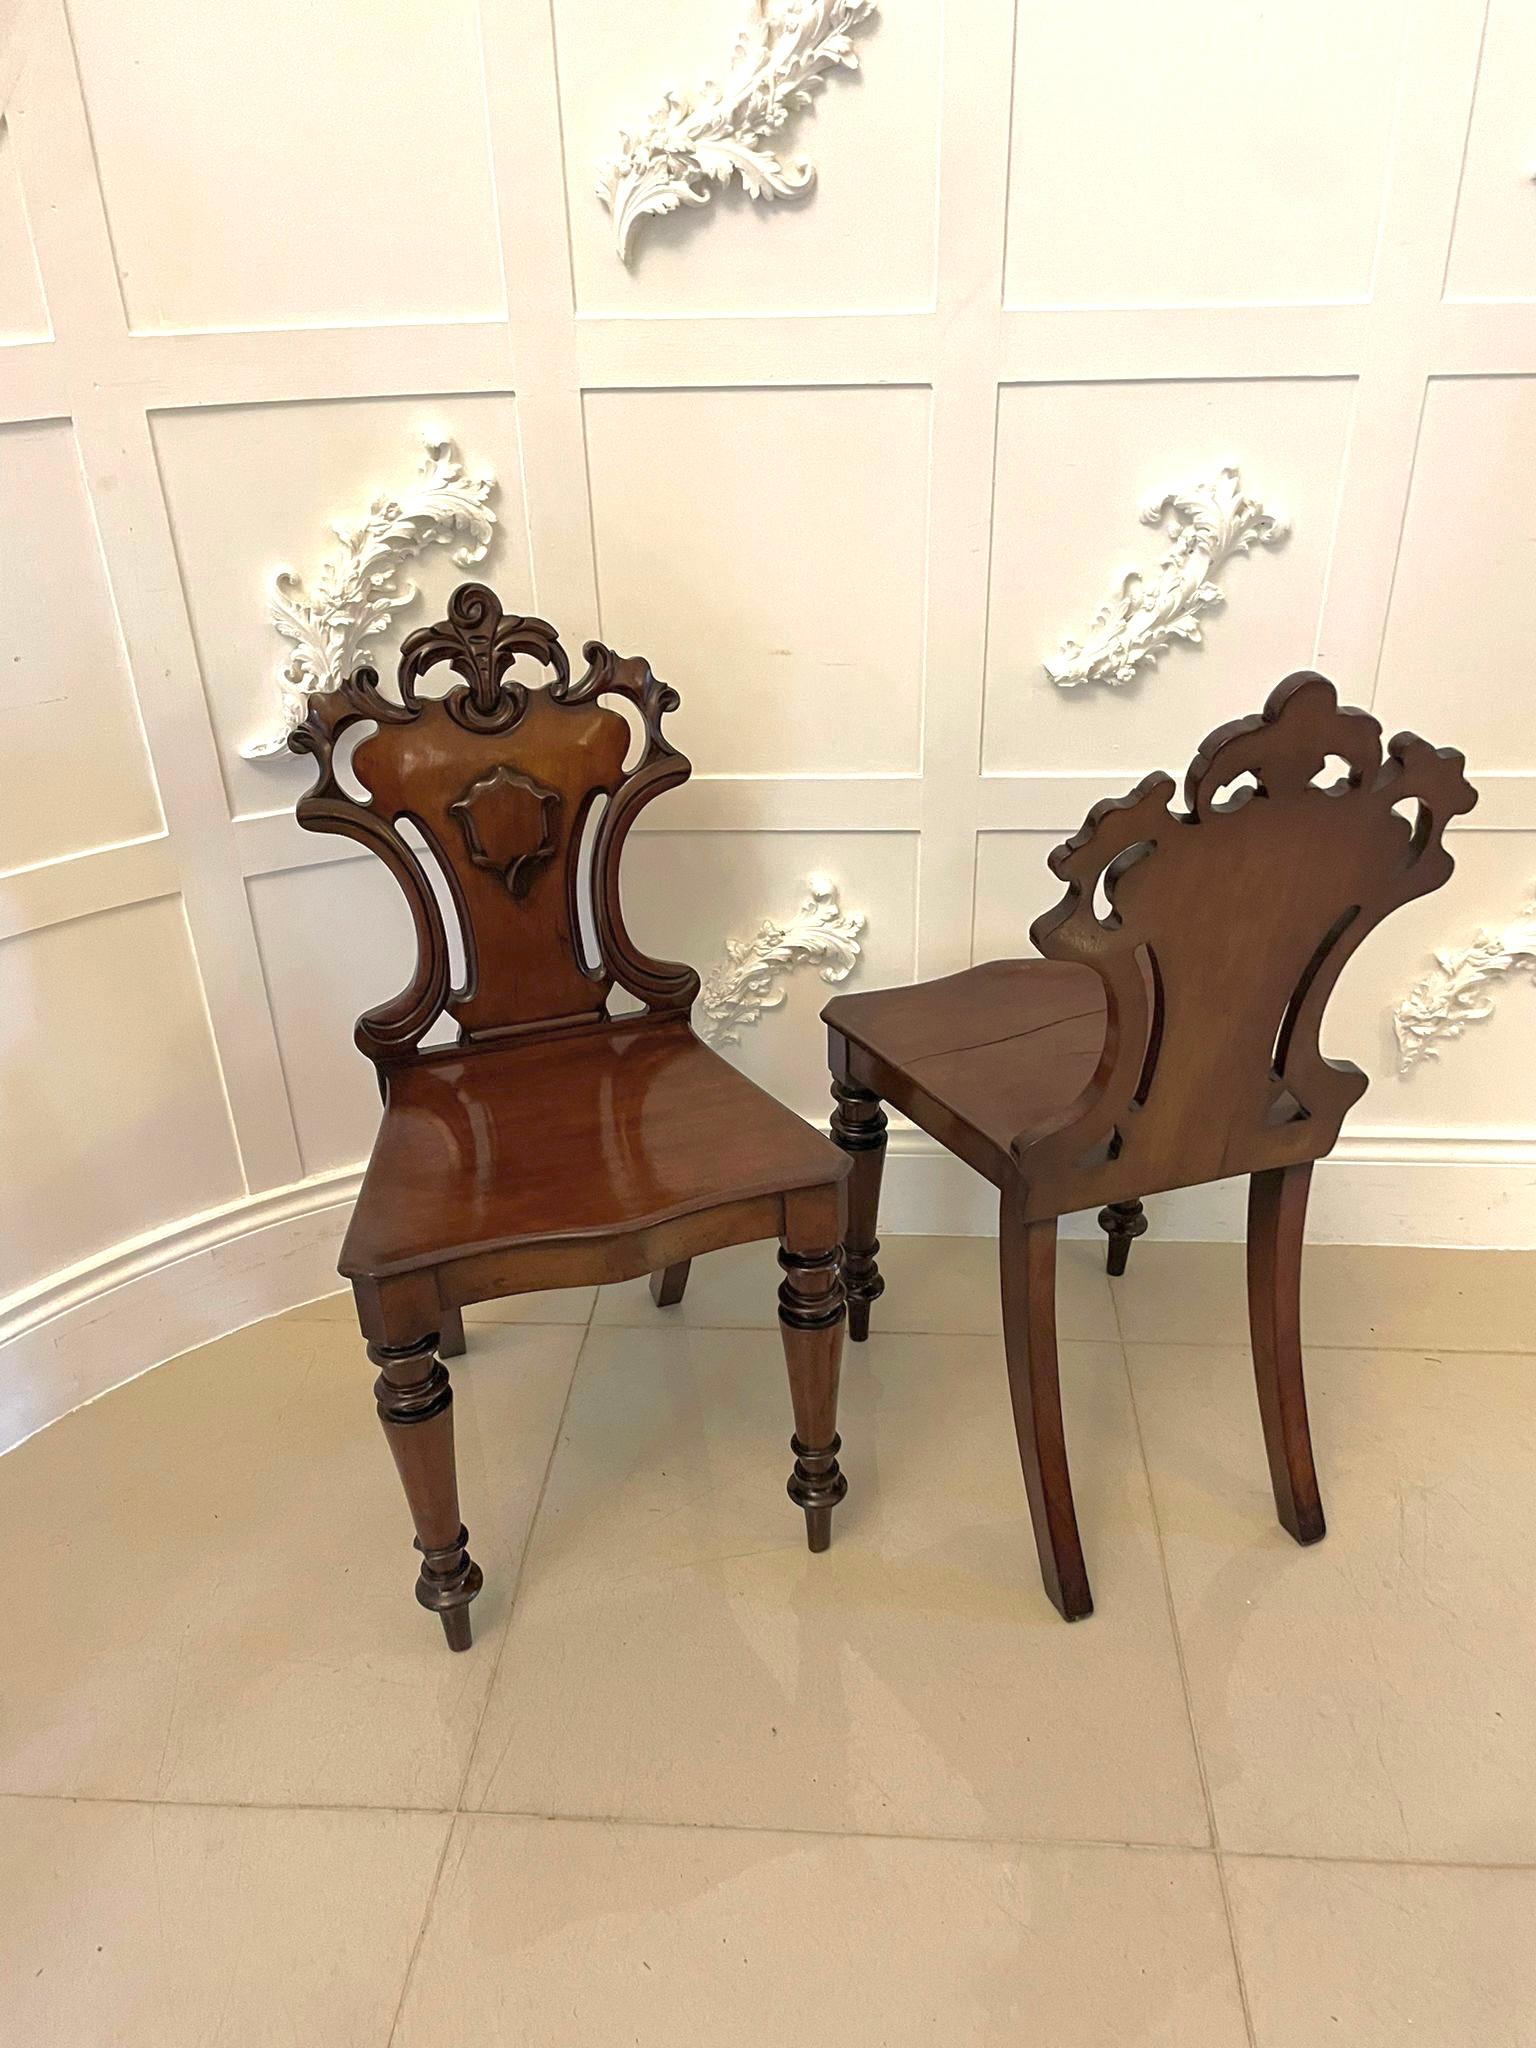 Quality antique pair of William IV mahogany hall chairs having beautifully carved solid mahogany shaped backs with a shield to the centre, solid mahogany seats and elegant shaped turned legs to the front and out swept back legs.

A quaint pair